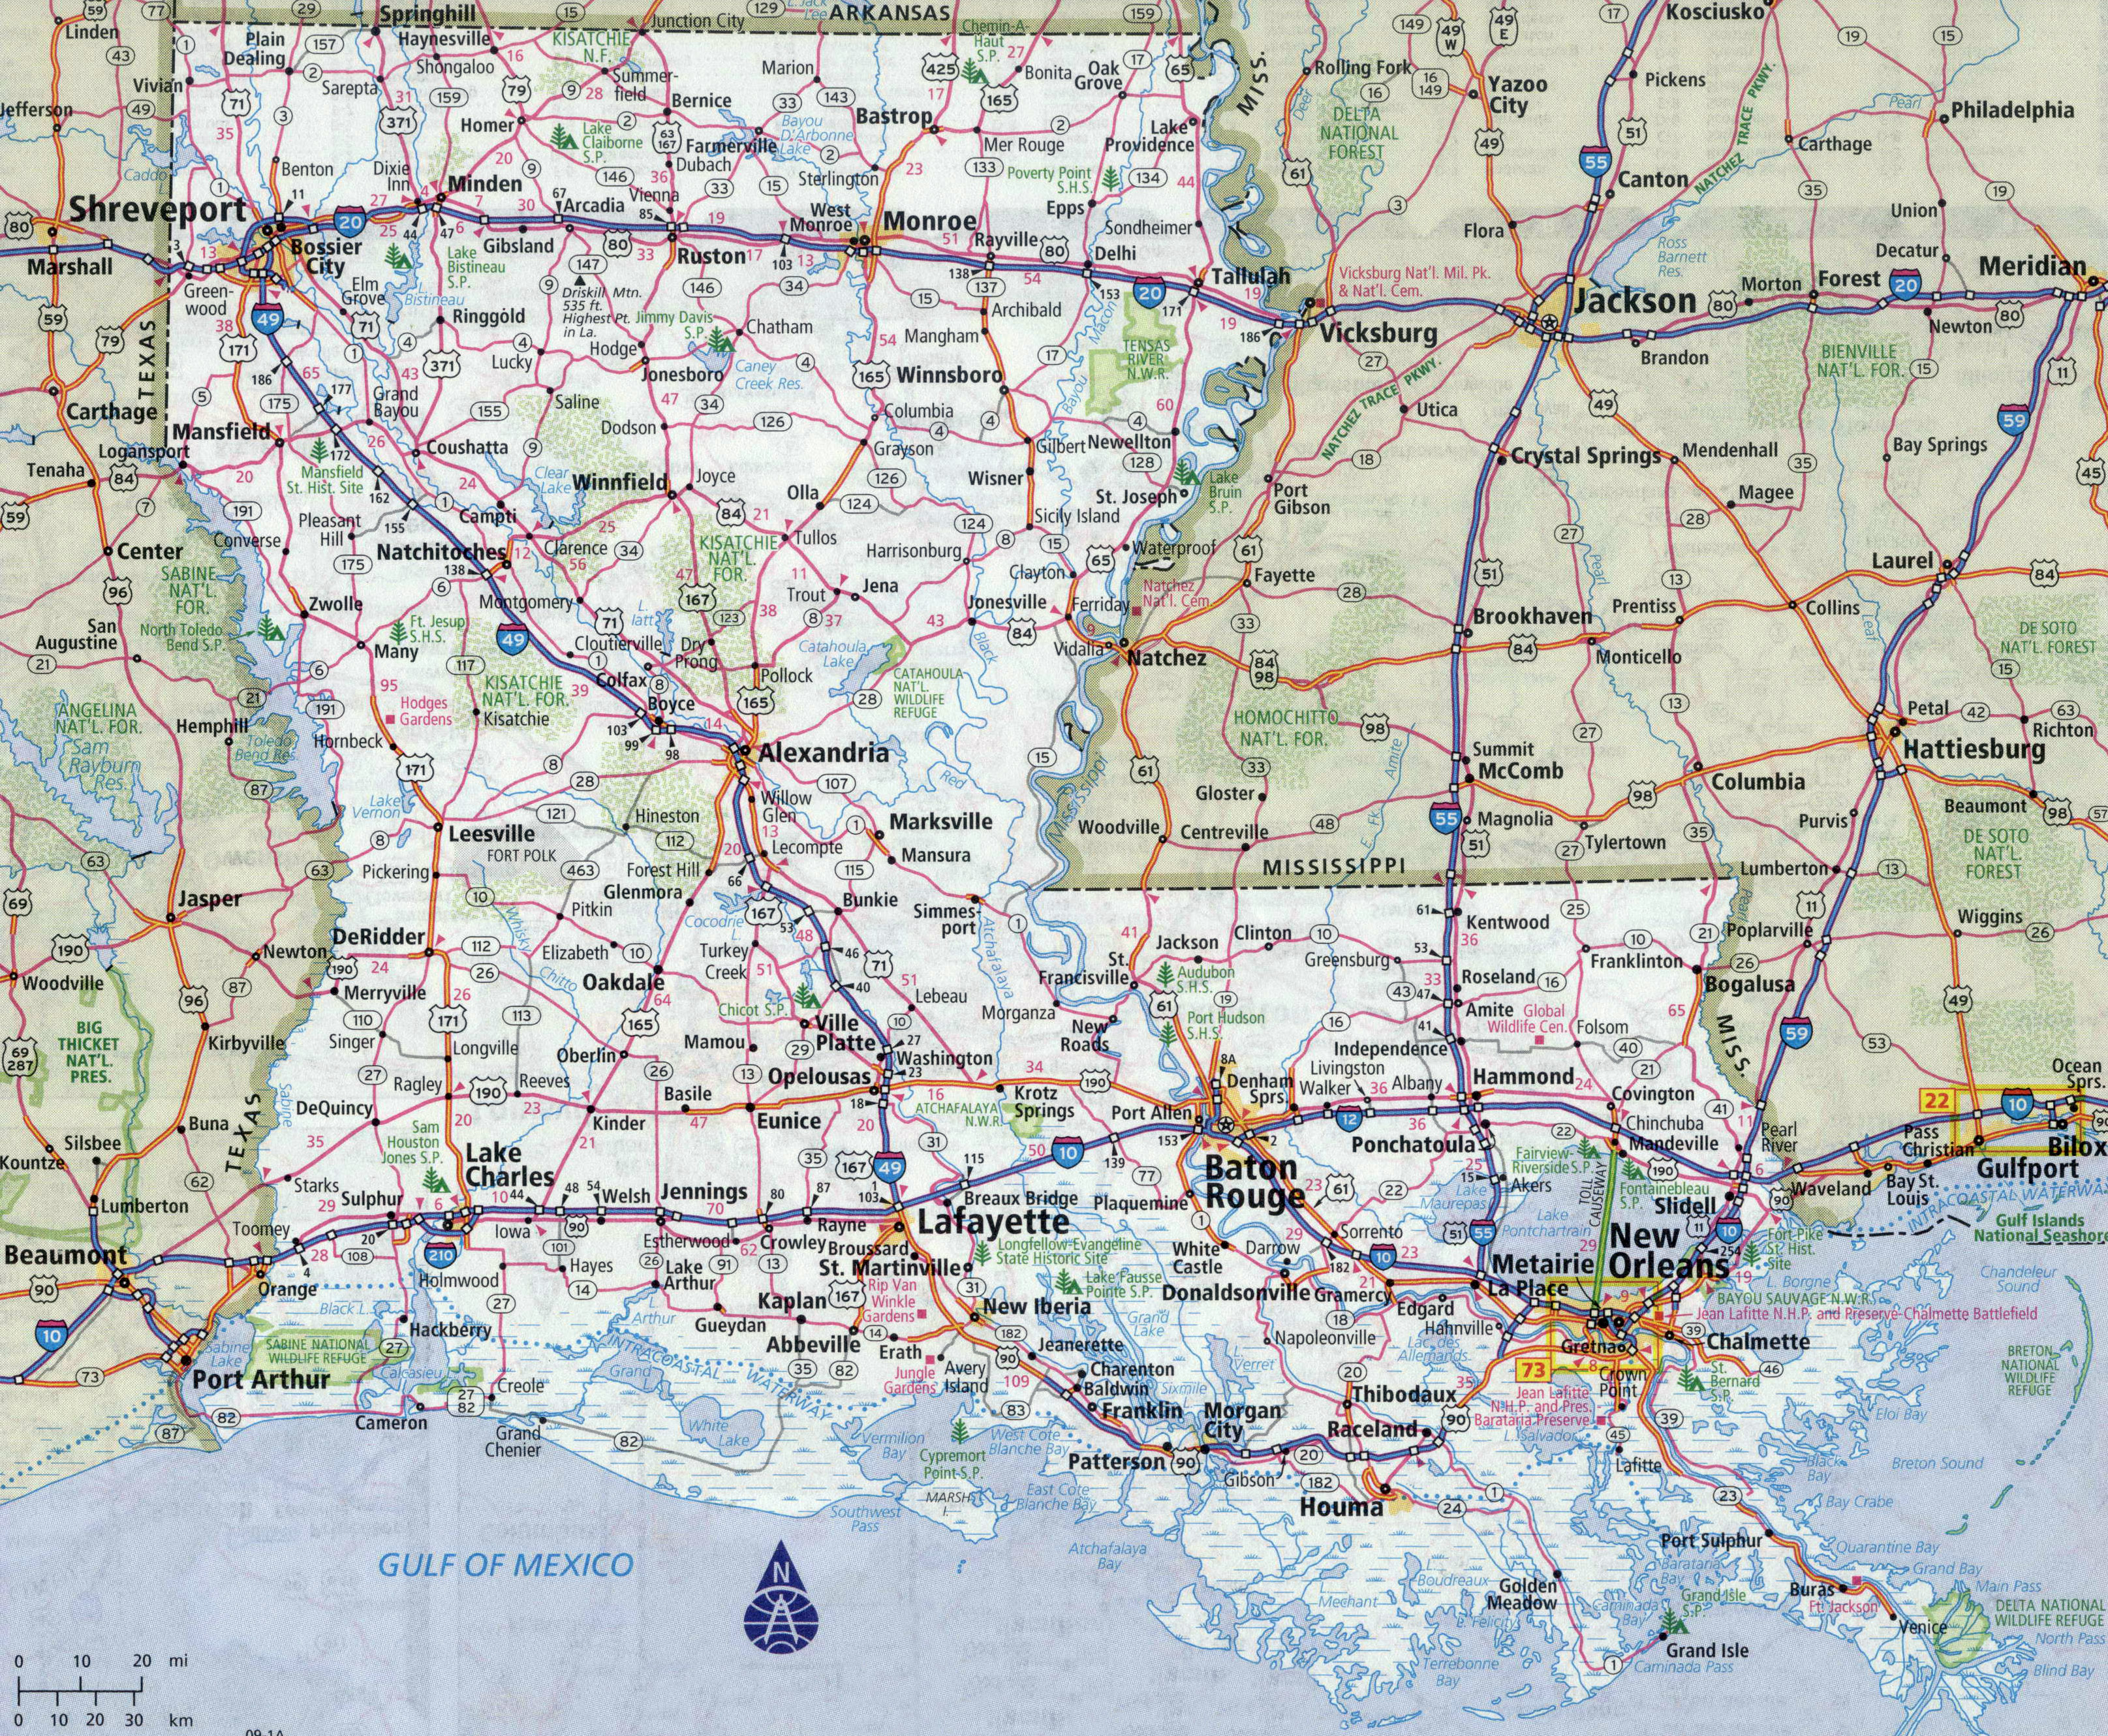 Louisiana Road Map - Check road network of State Routes, US Highways, and  Interstate Highways in Louisiana at Whereig.